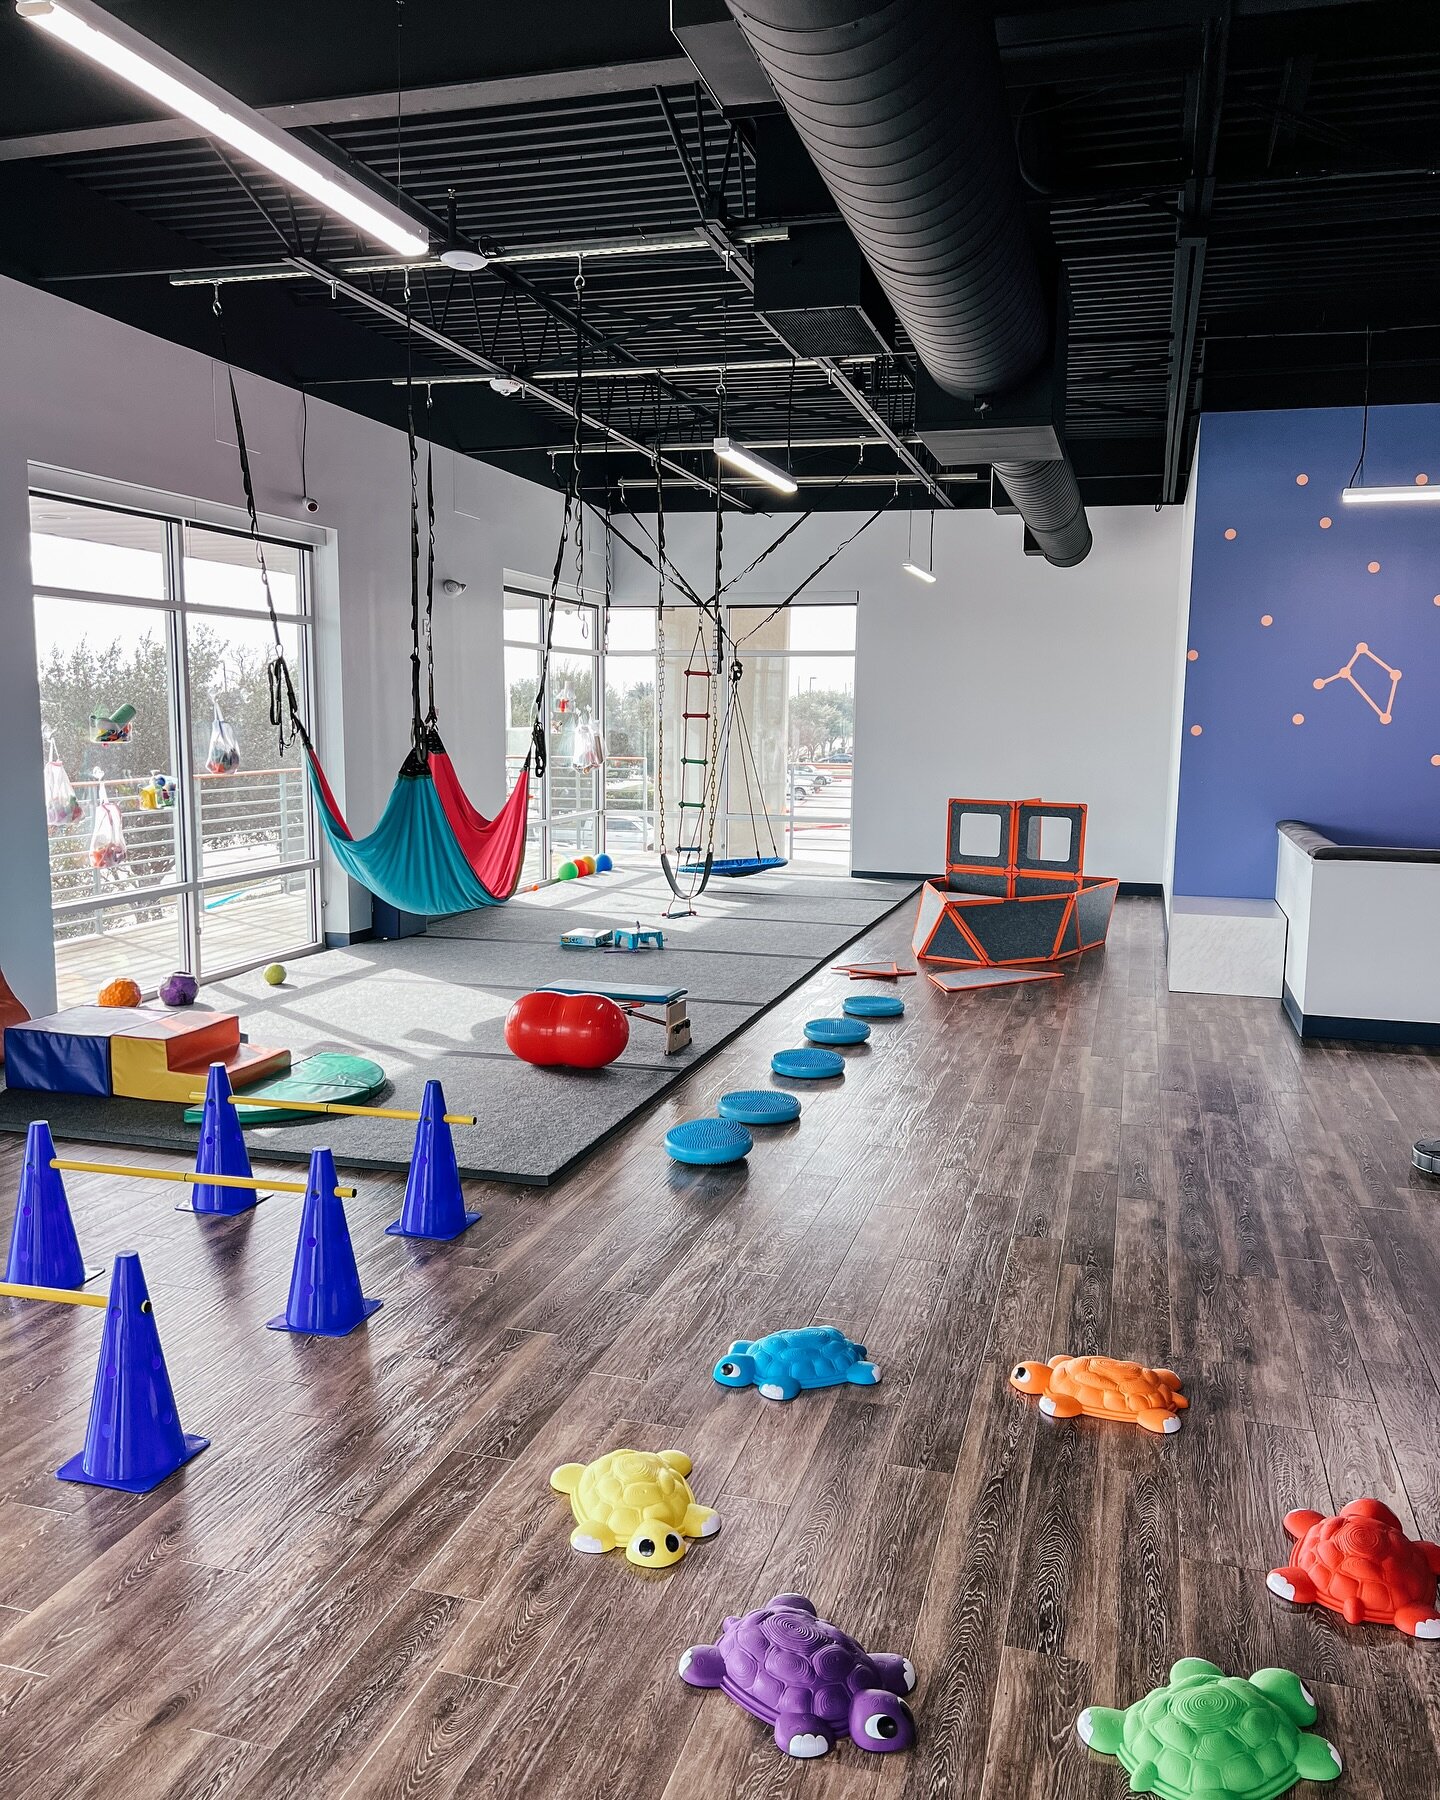 So much room for activities!!! Our open concept therapy gym allows our therapists to bring ~anything~ in to make therapy fun and engaging! 💫 #PediatricTherapy #HoustonTherapy #HoustonTherapist #SpeechTherapy #OccupationalTherapy #PhysicalTherapy #Pe